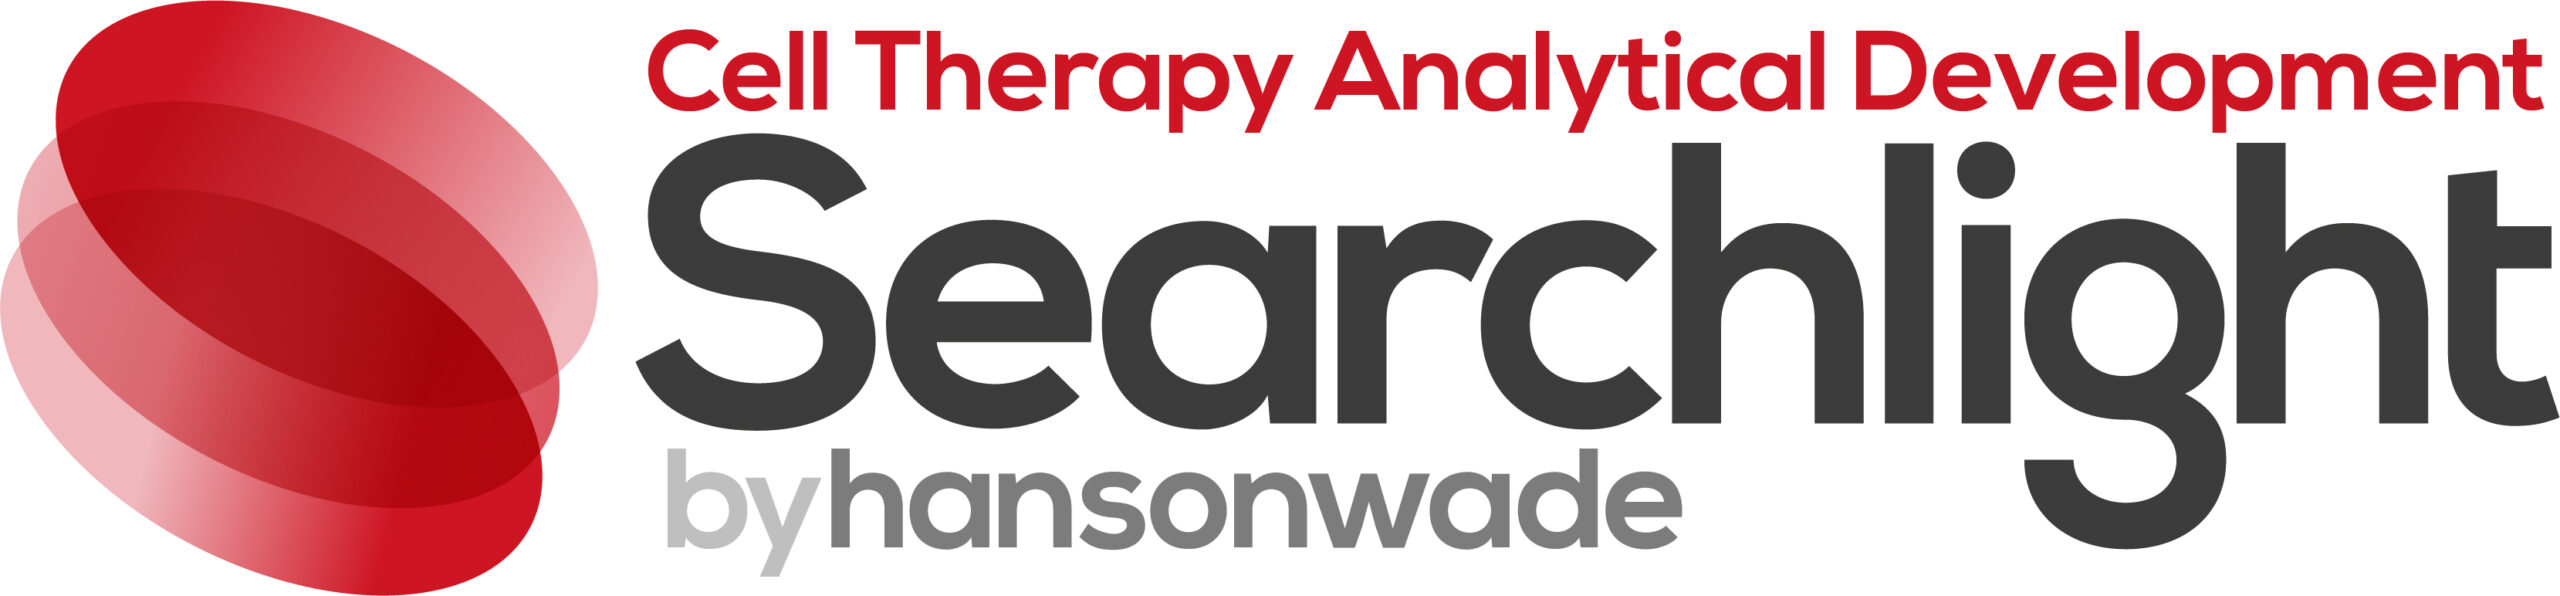 Cell Therapy Analytical Development Searchlight